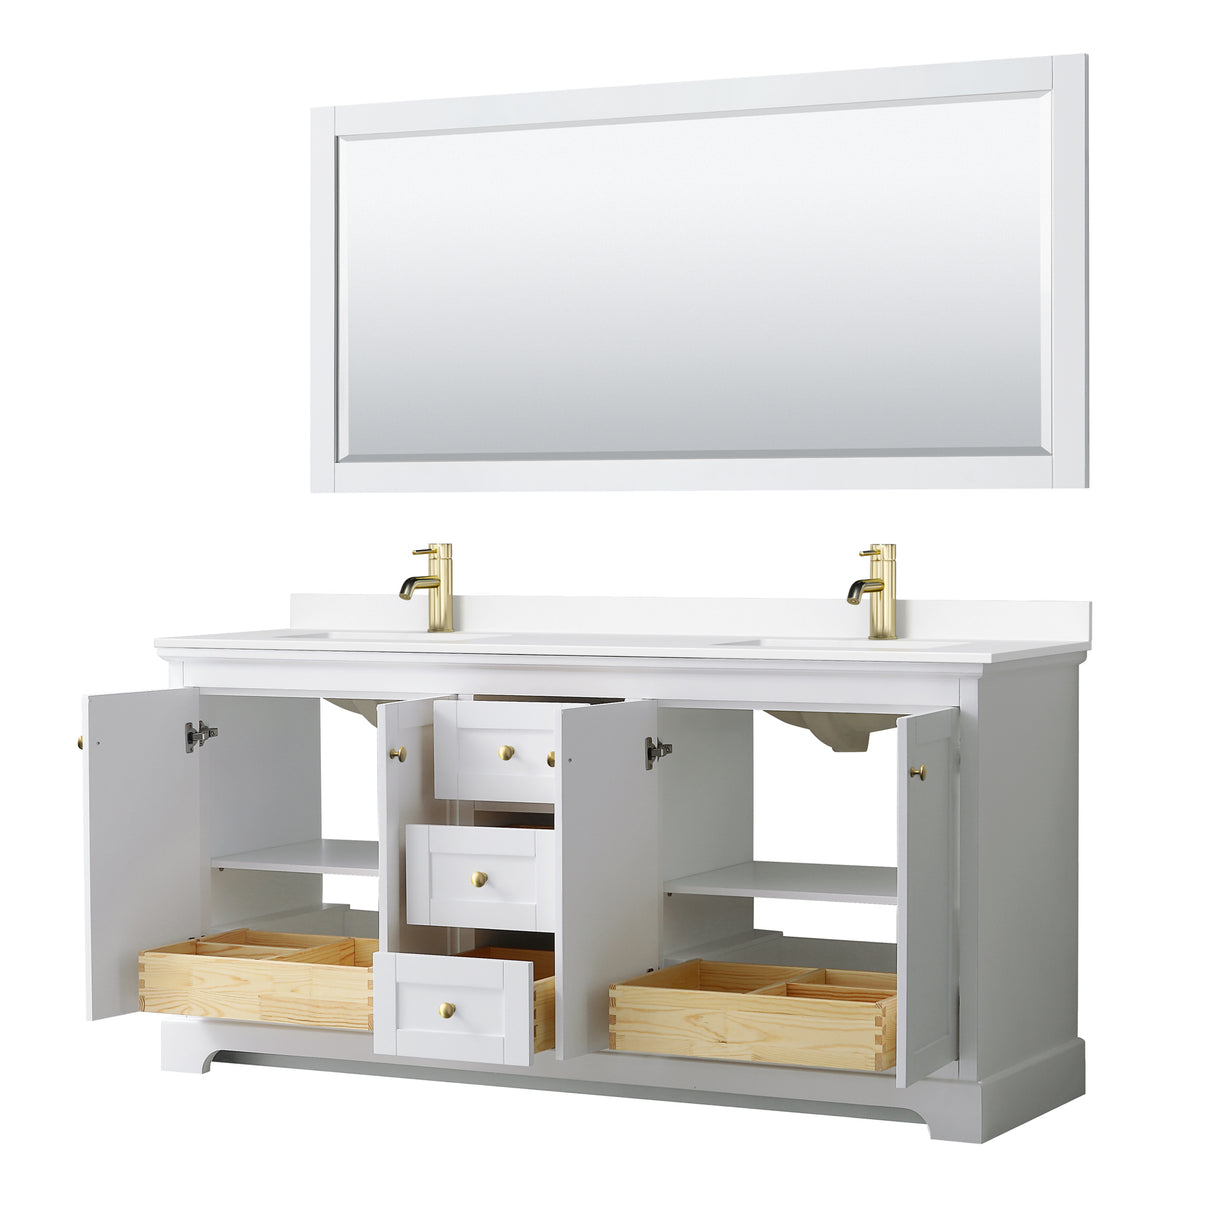 Avery 72 Inch Double Bathroom Vanity in White White Cultured Marble Countertop Undermount Square Sinks 70 Inch Mirror Brushed Gold Trim